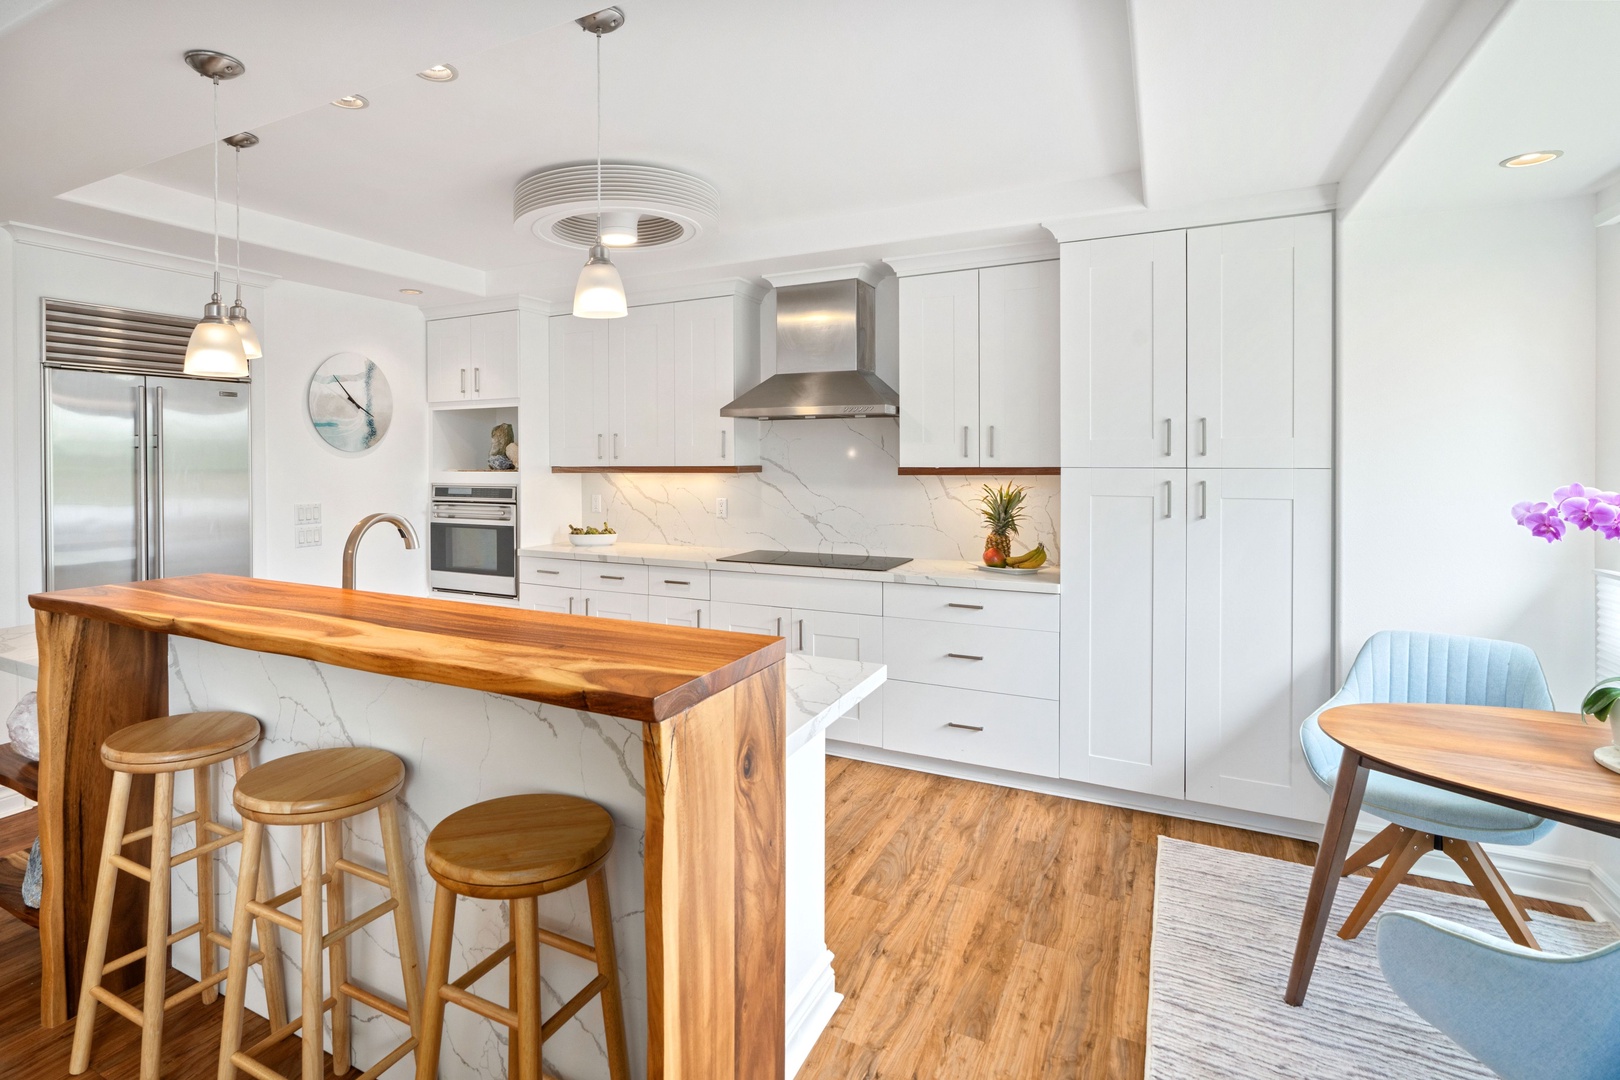 Princeville Vacation Rentals, Tropical Elegance - Experience a touch of luxury in this fully-equipped kitchen, featuring modern appliances, bar seating, and aesthetic decor, perfect for memorable short-term stays.